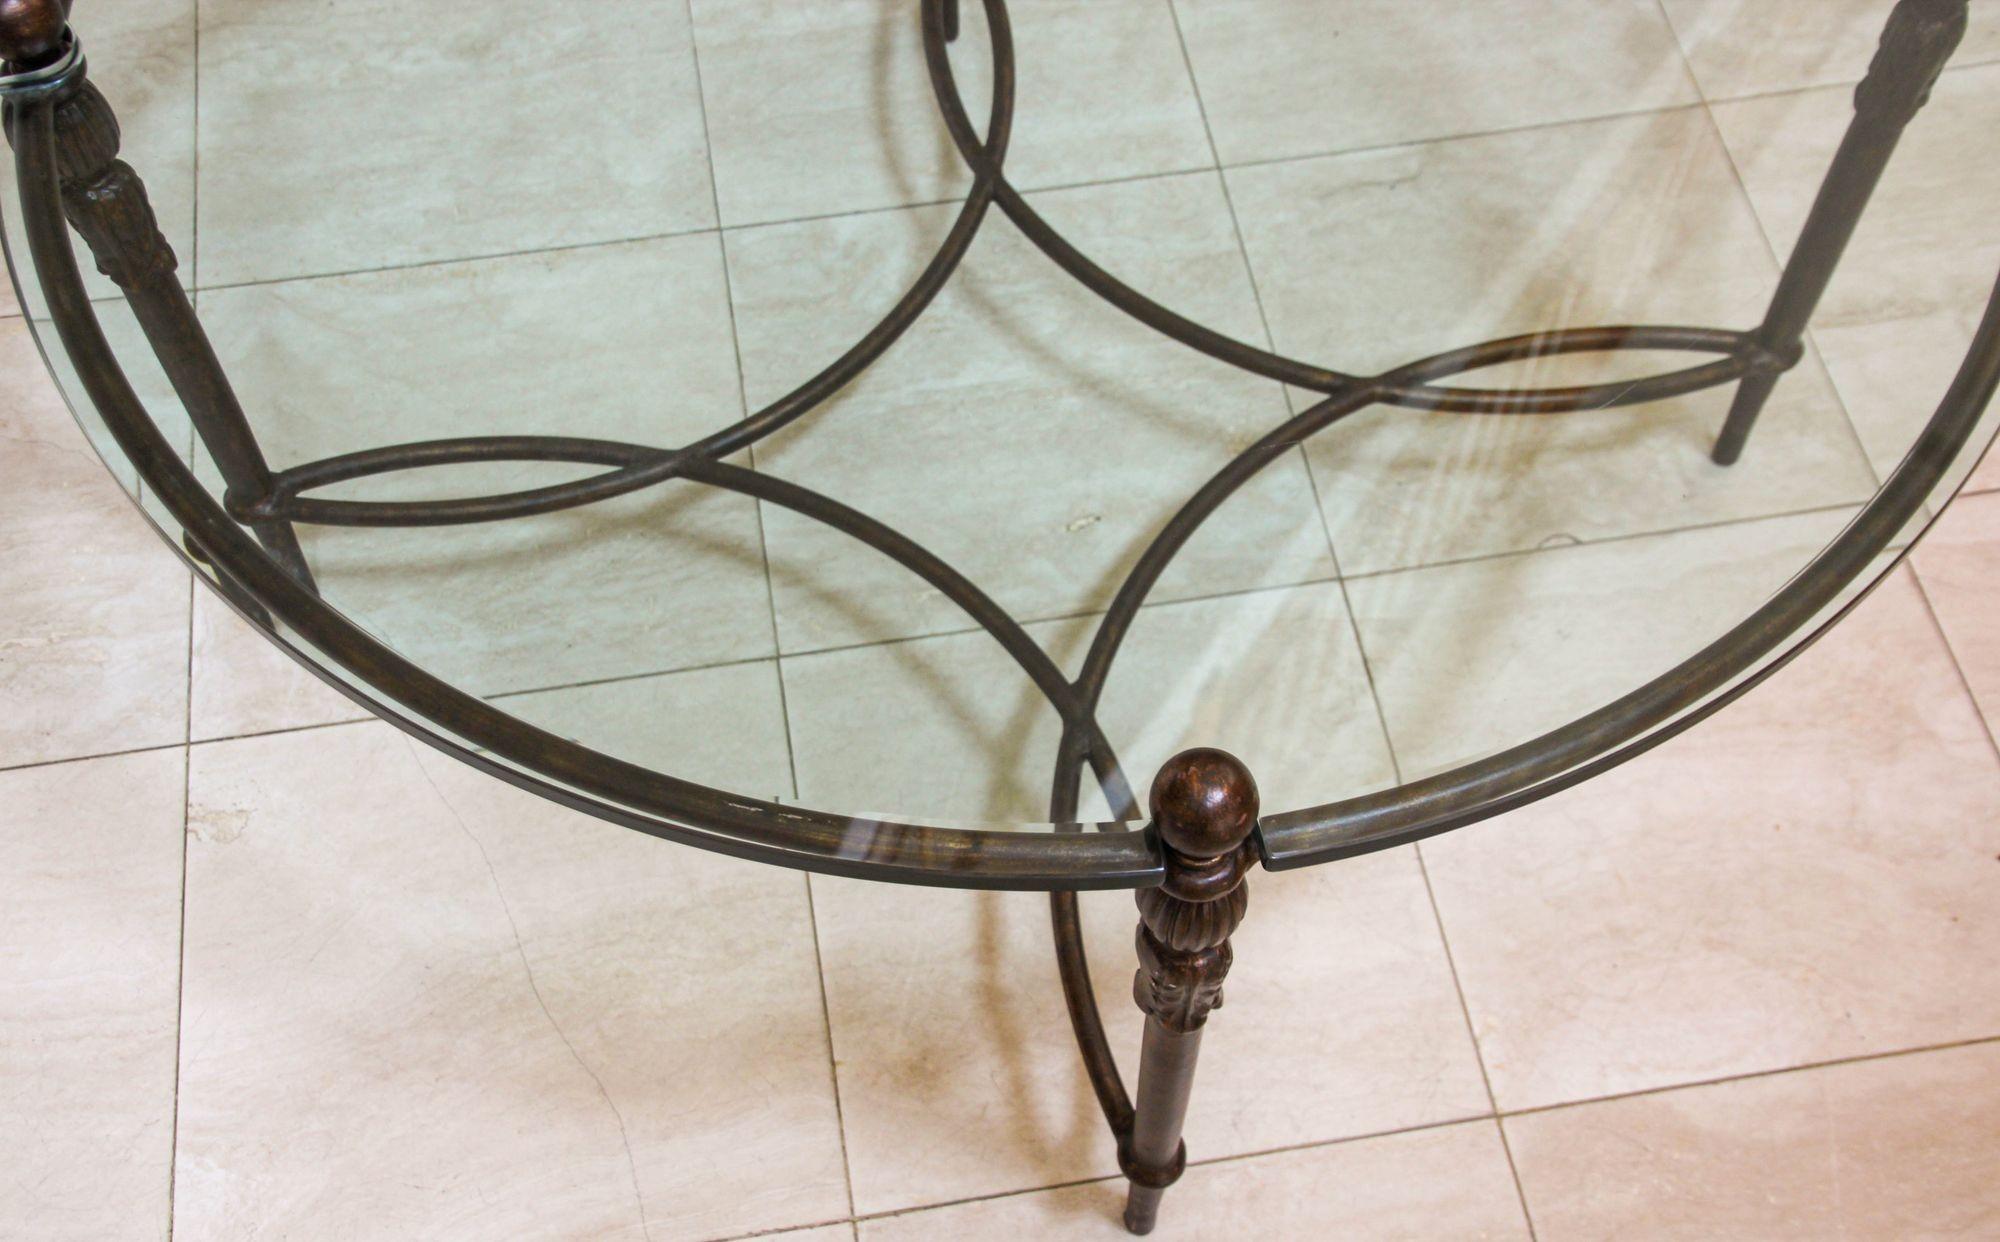 Michael Taylor Montecito Round Glass Coffee Table Outdoor Indoor Cocktail Table In Good Condition For Sale In North Hollywood, CA